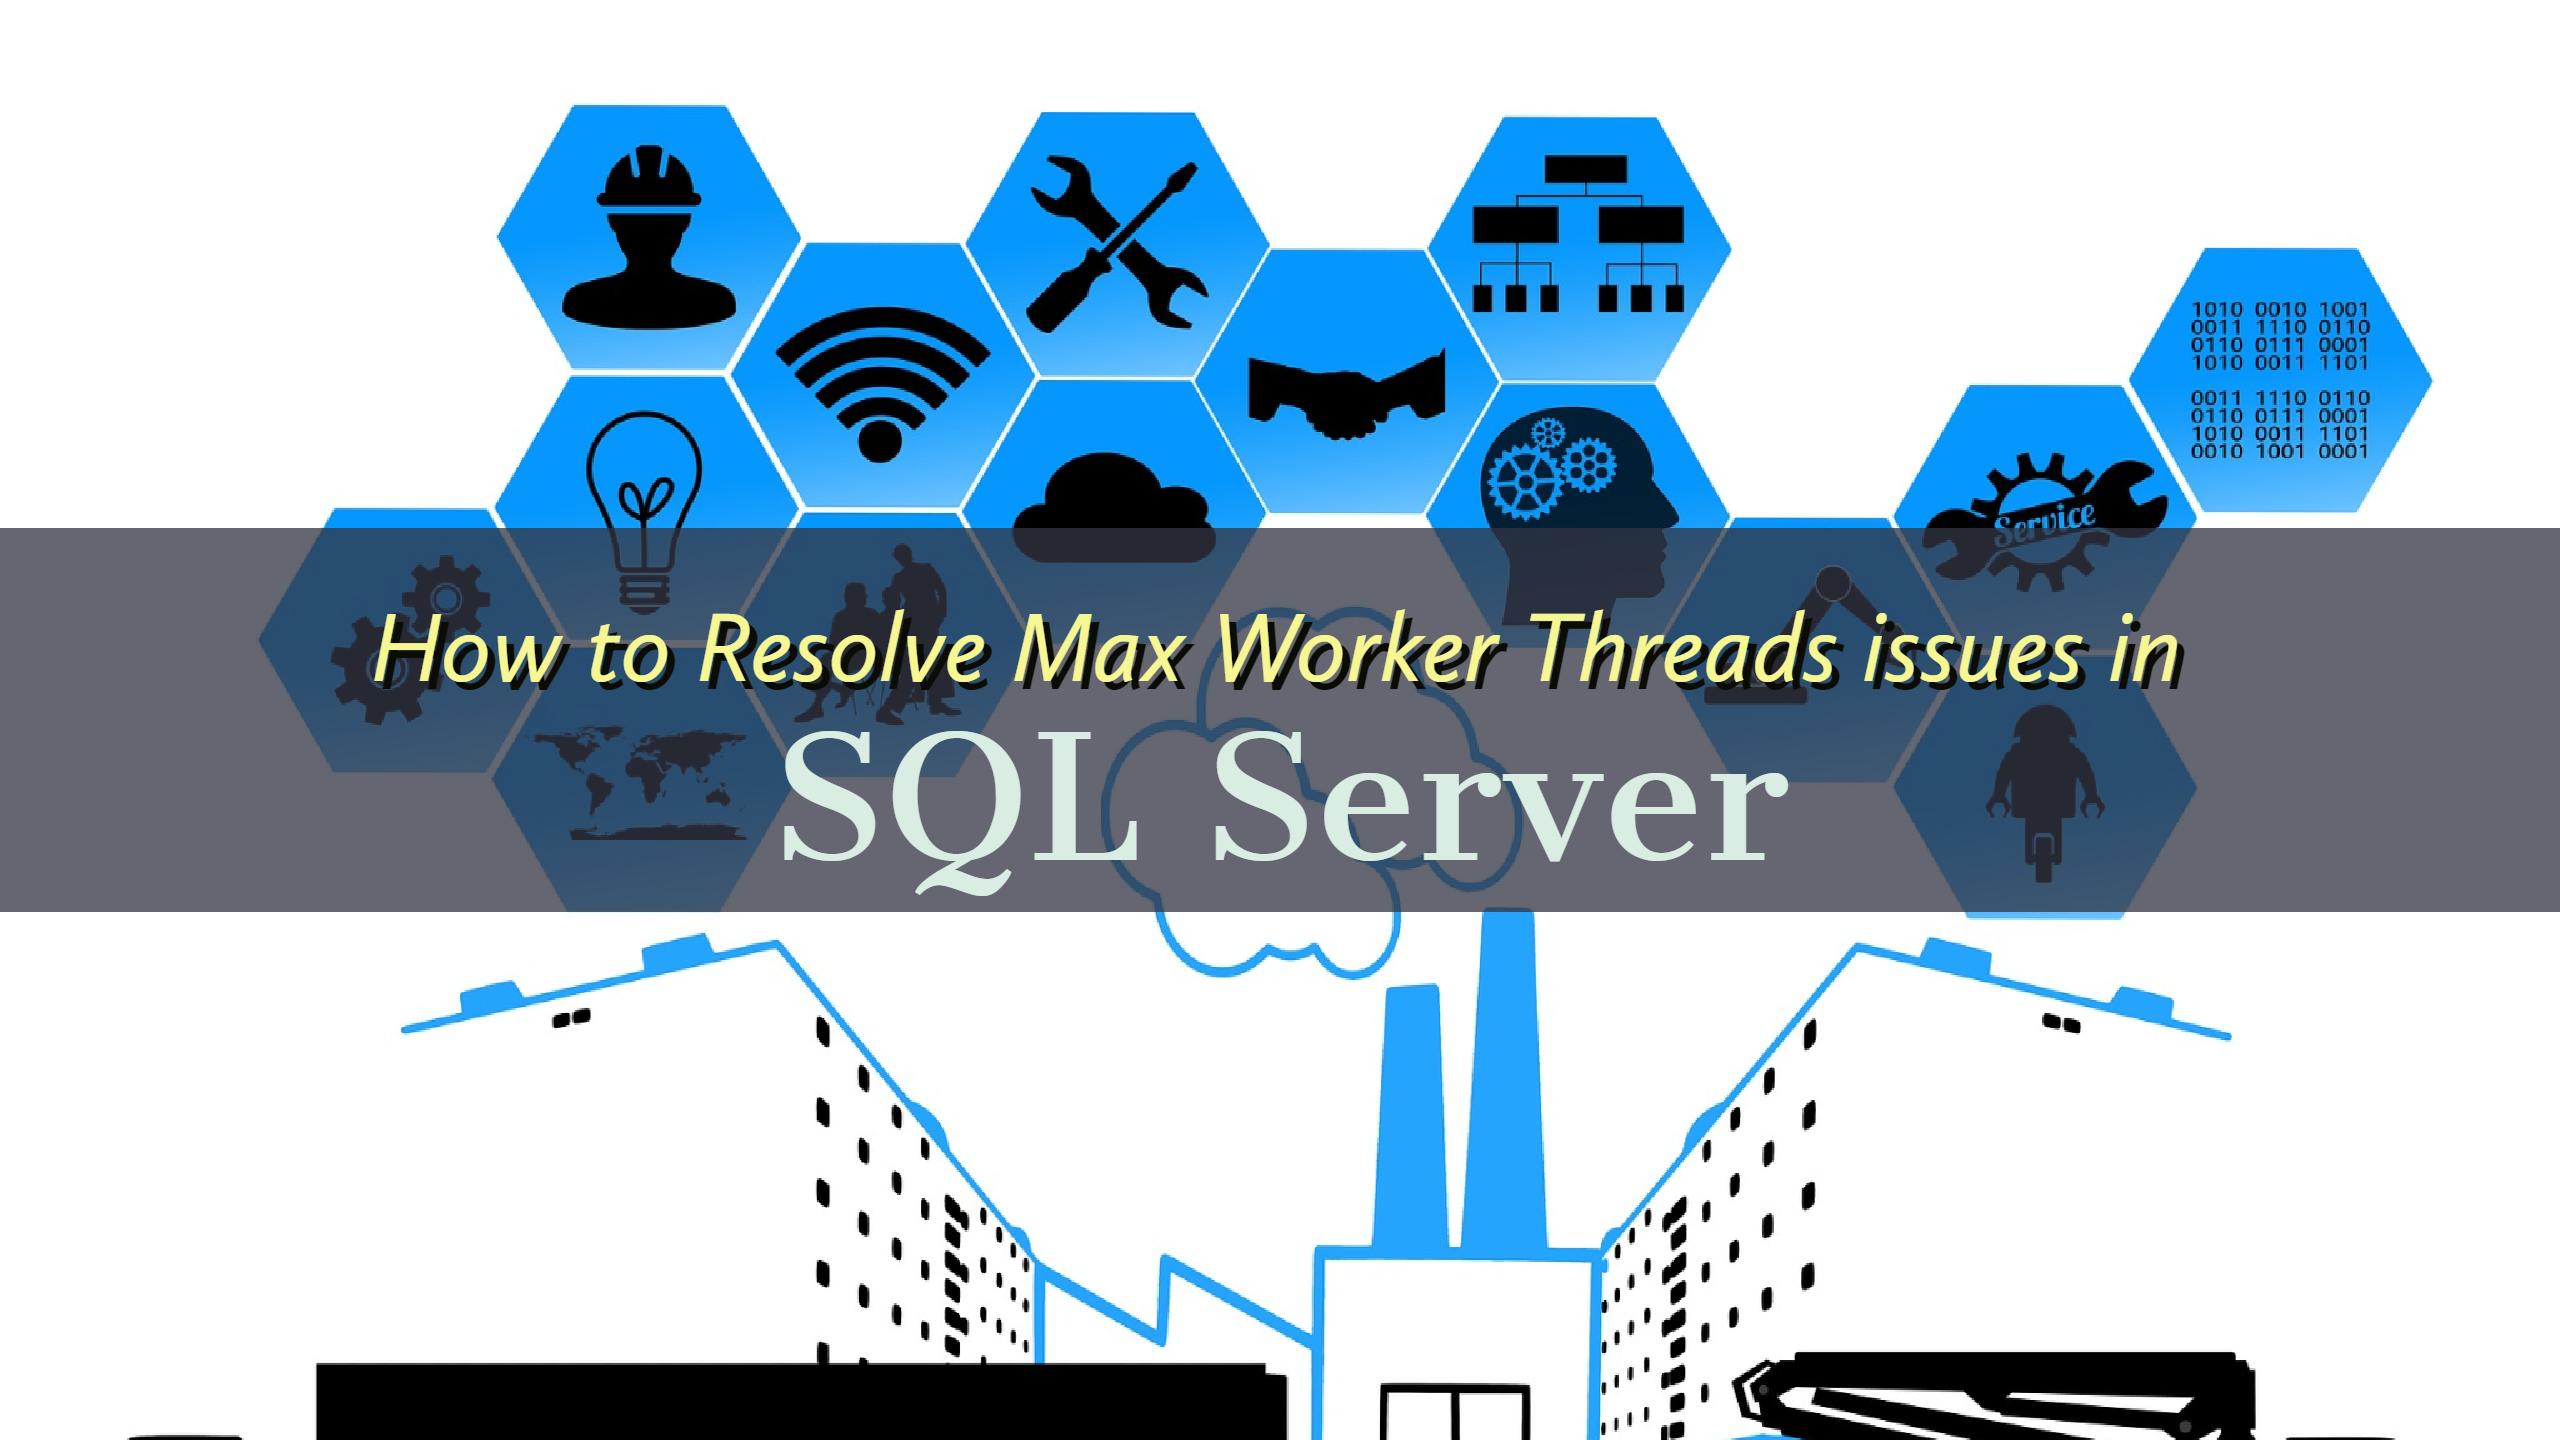 Resolve Max Worker Threads issues in SQL Server